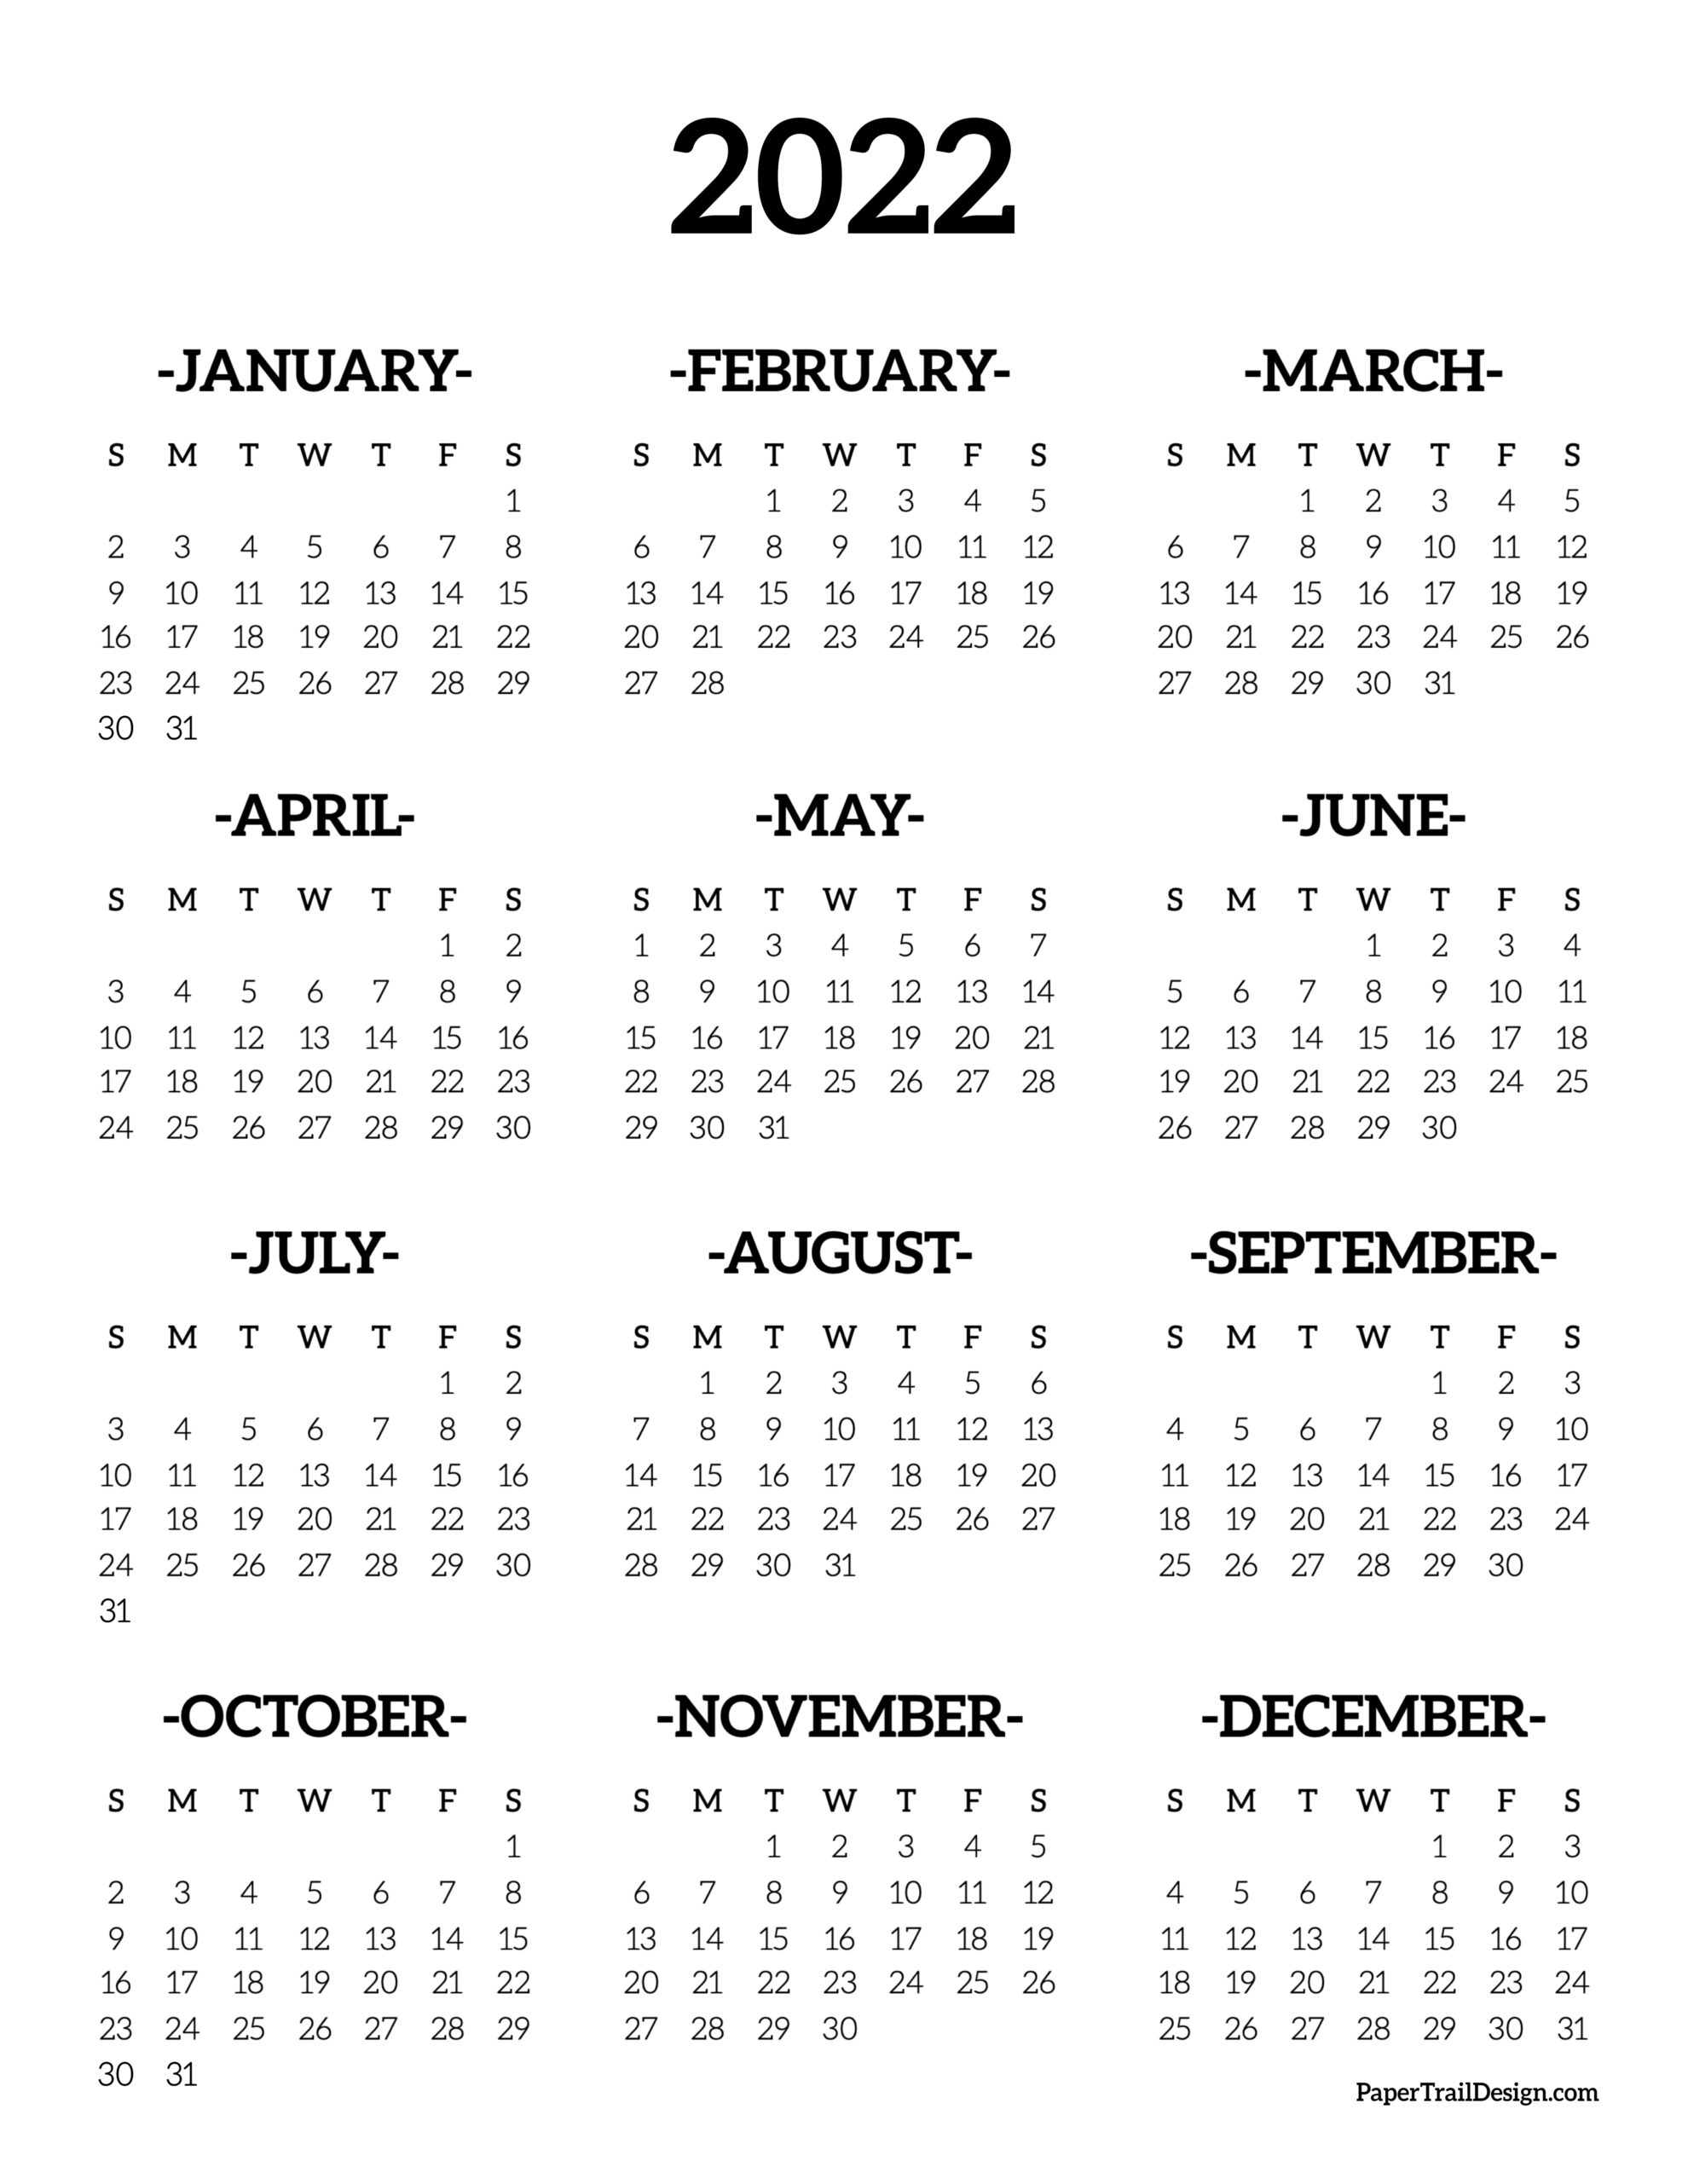 Full Page Calendar 2022 Calendar 2022 Printable One Page - Paper Trail Design